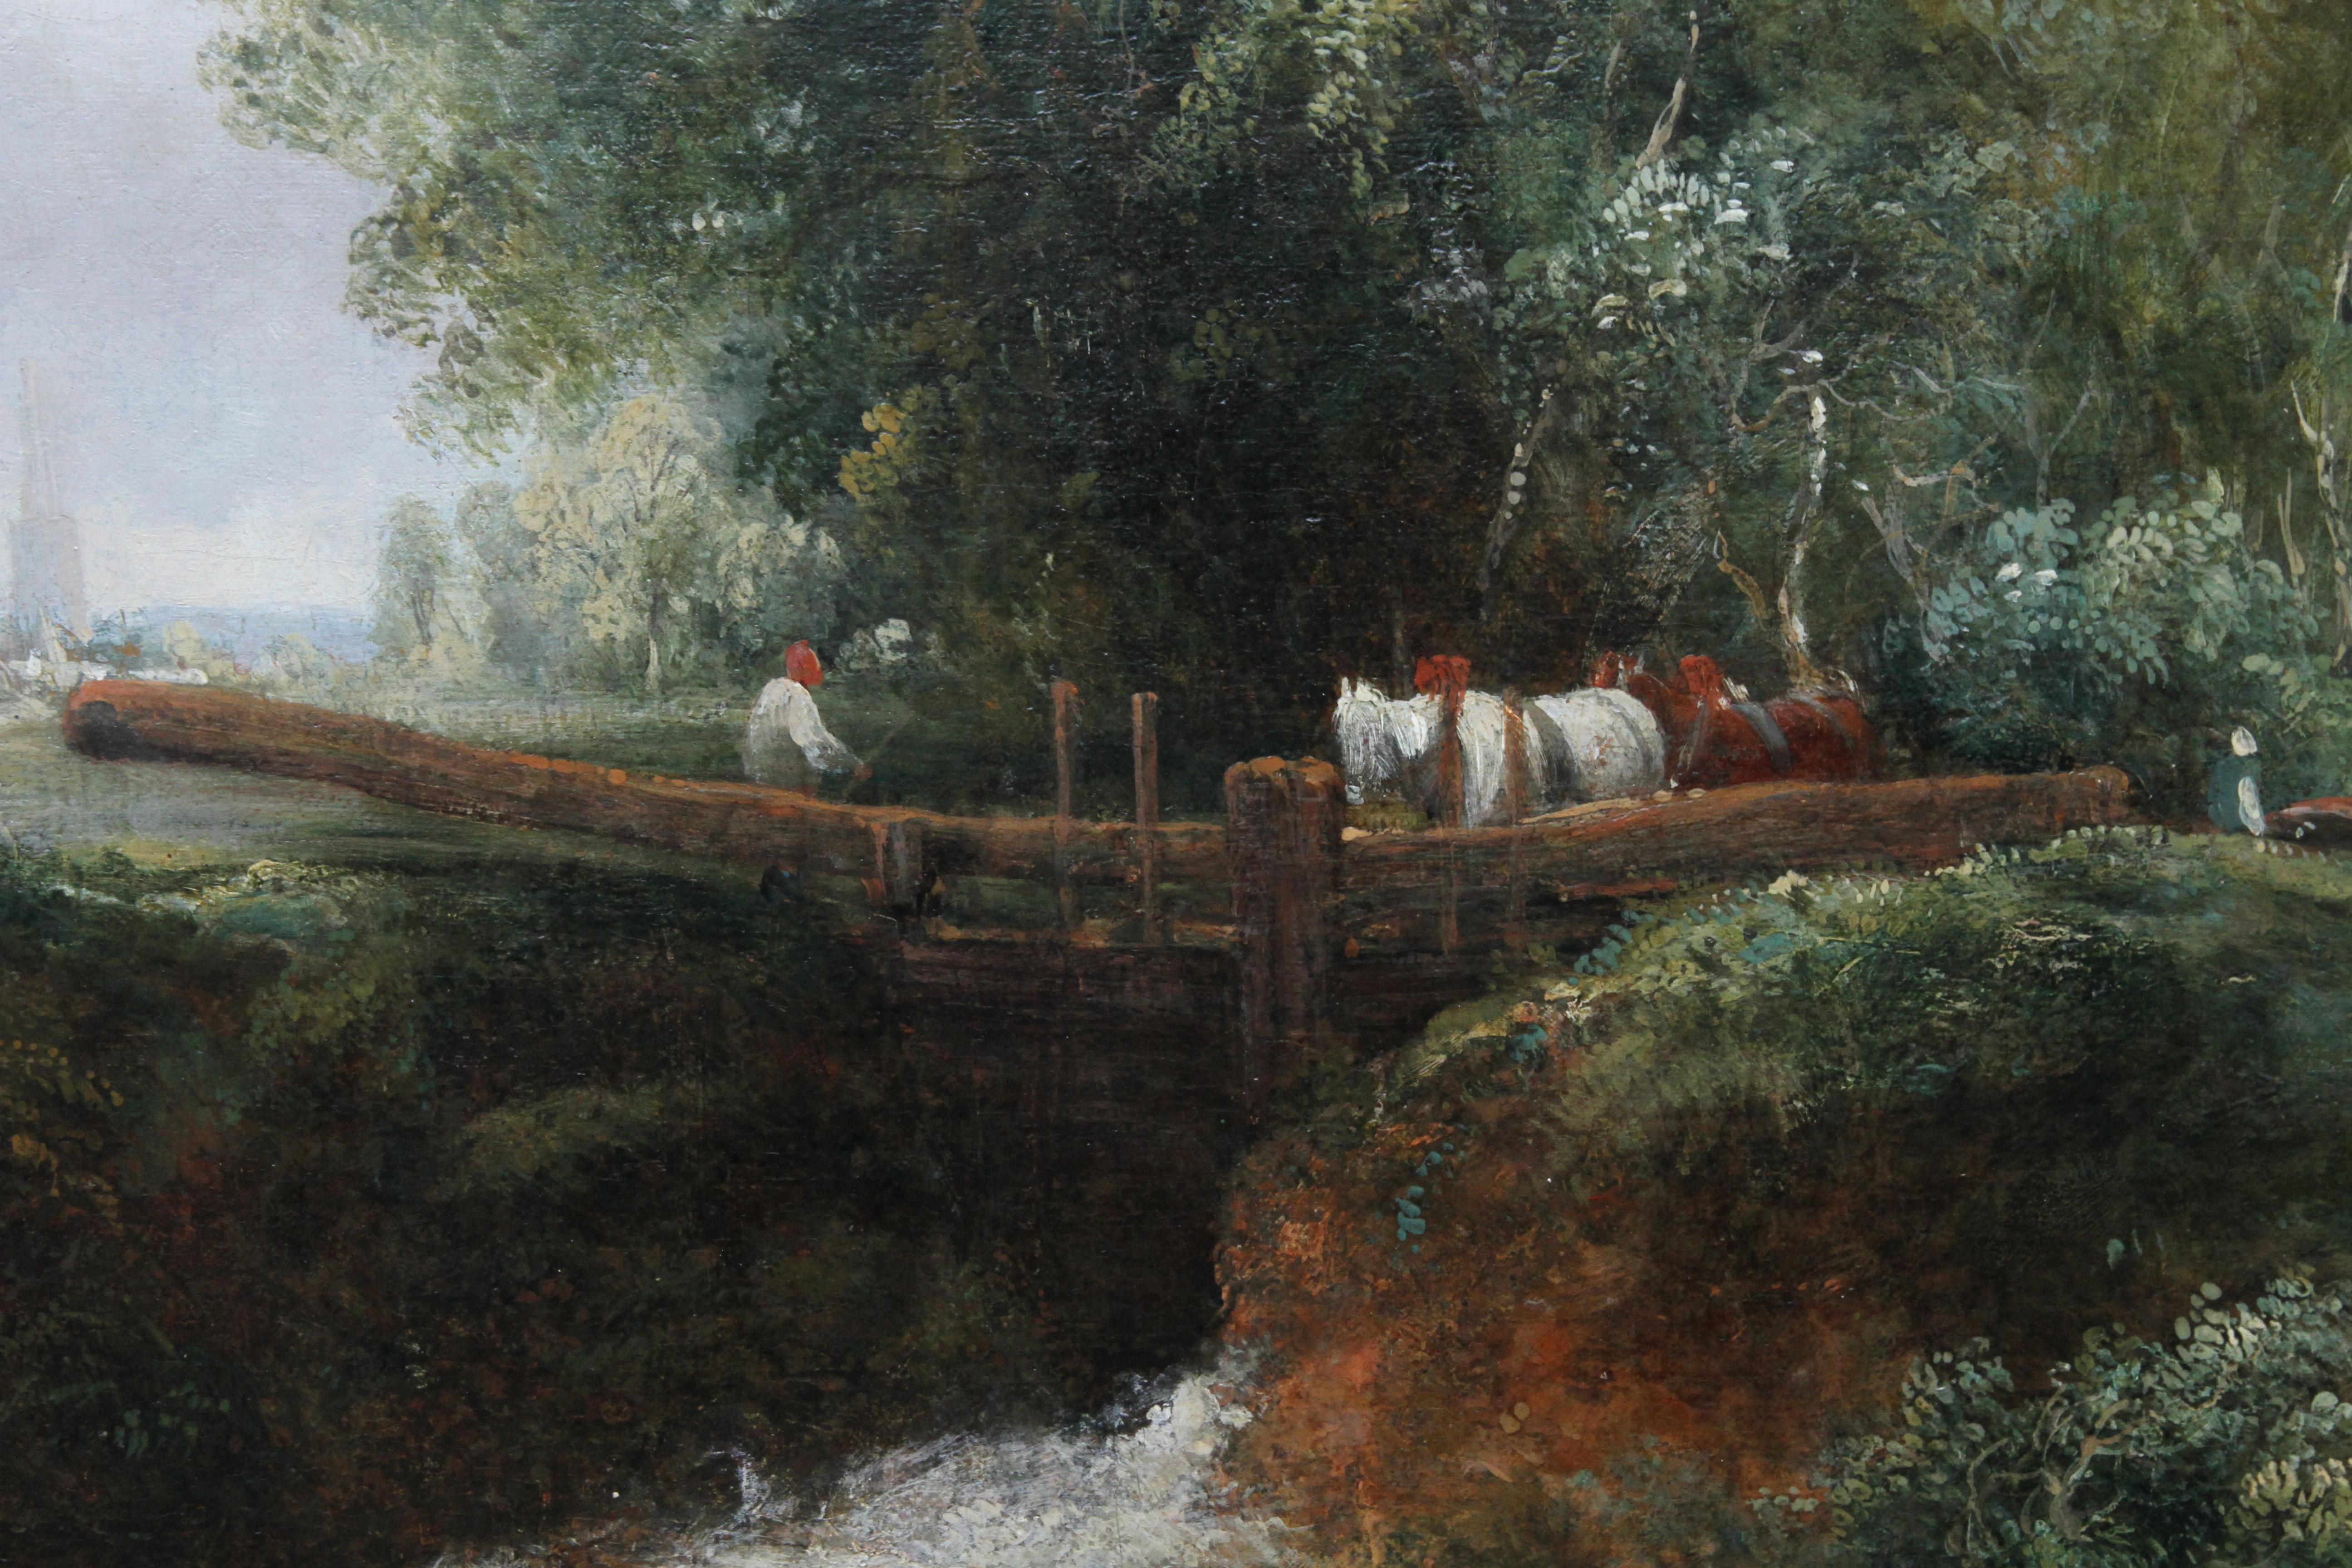 This lovely landscape oil painting is by 19th century British artist Frederick Waters Watts. The painting dating to 1850 depicts lock gates on the Stour opening above for the waiting barge and a small boat below struggling to stay steady in the